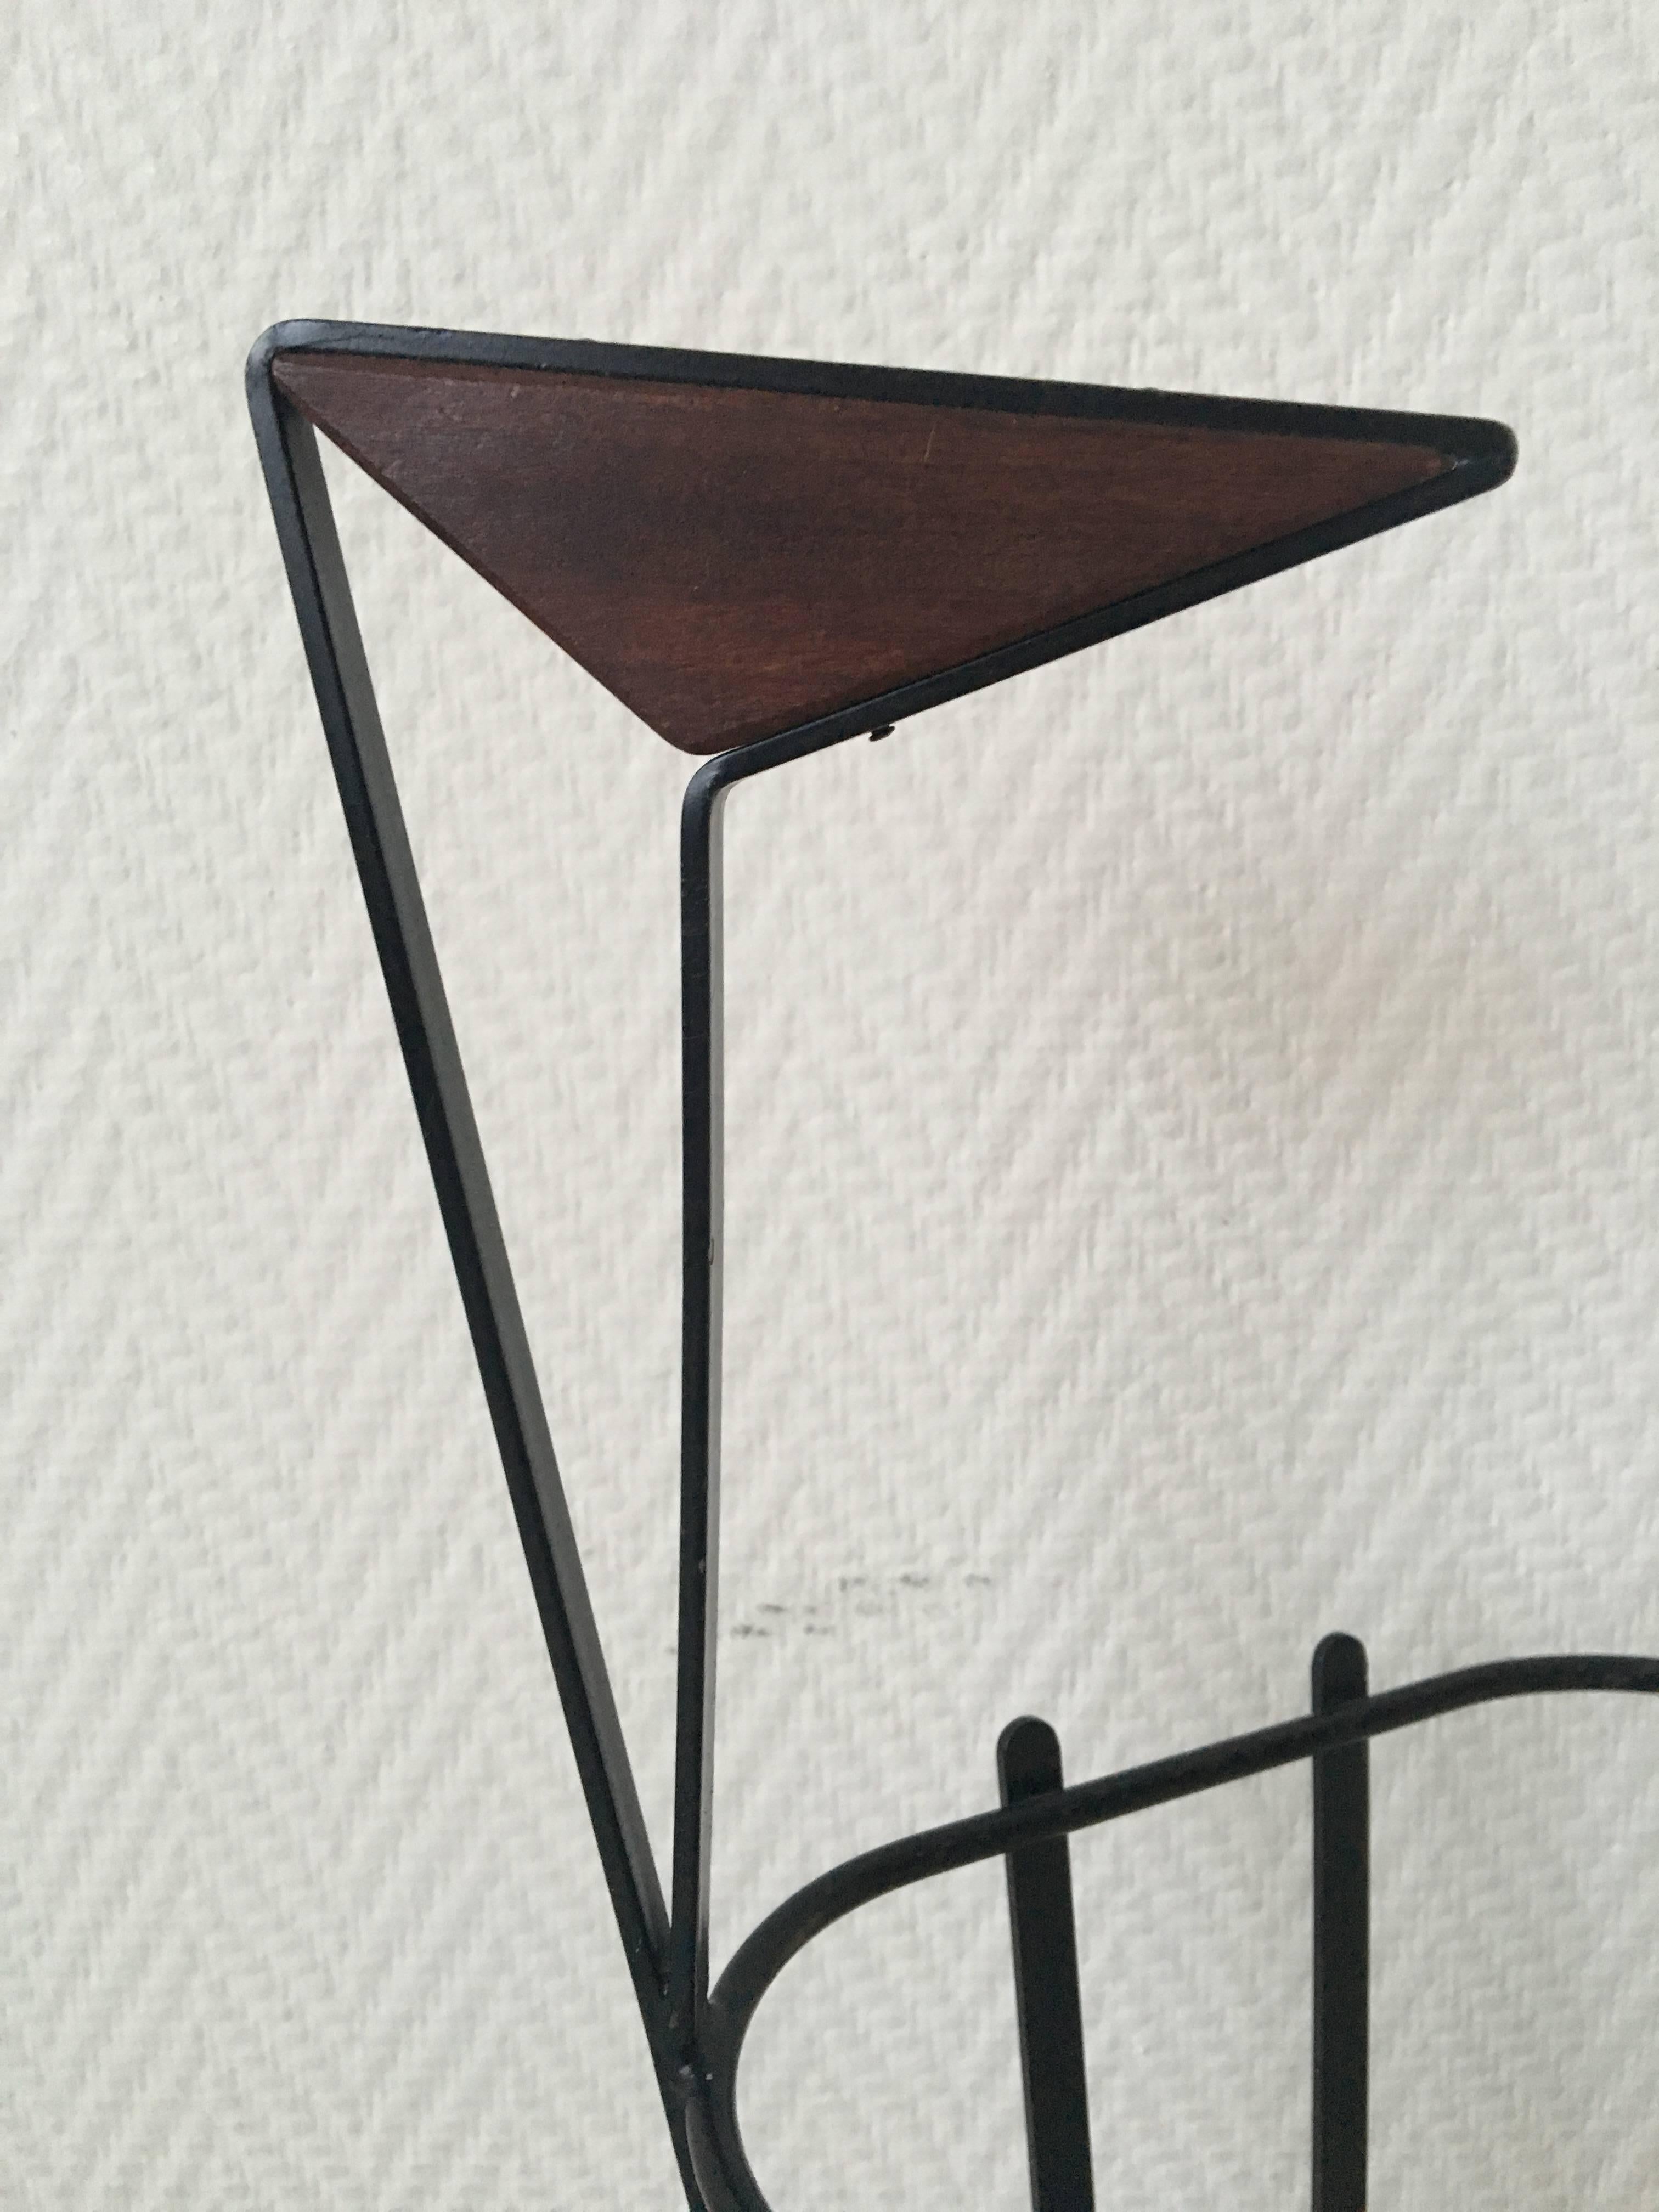 Metal and Teak Tripod Umbrella Stand in Style of Mathieu Matégot, 1950s In Good Condition For Sale In Schagen, NL